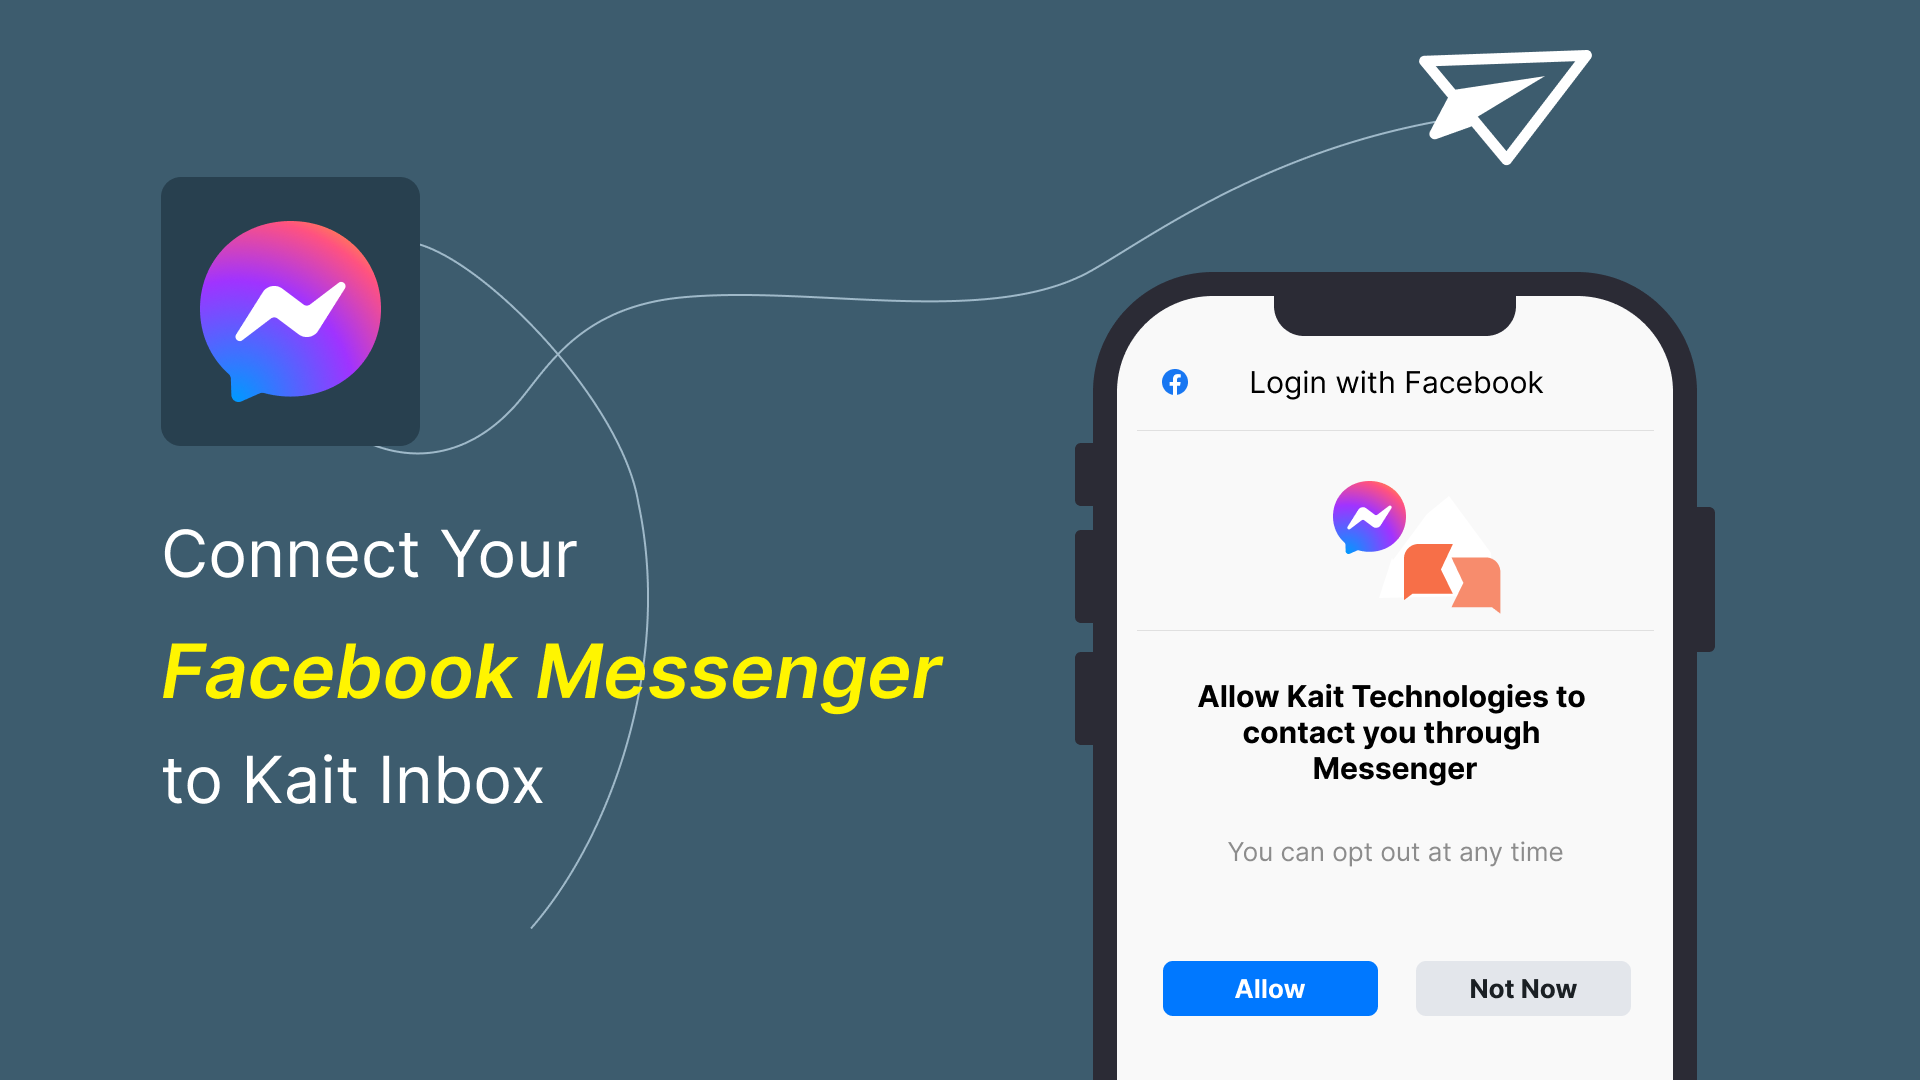 How To Connect Your Facebook Messenger to Kait Inbox?